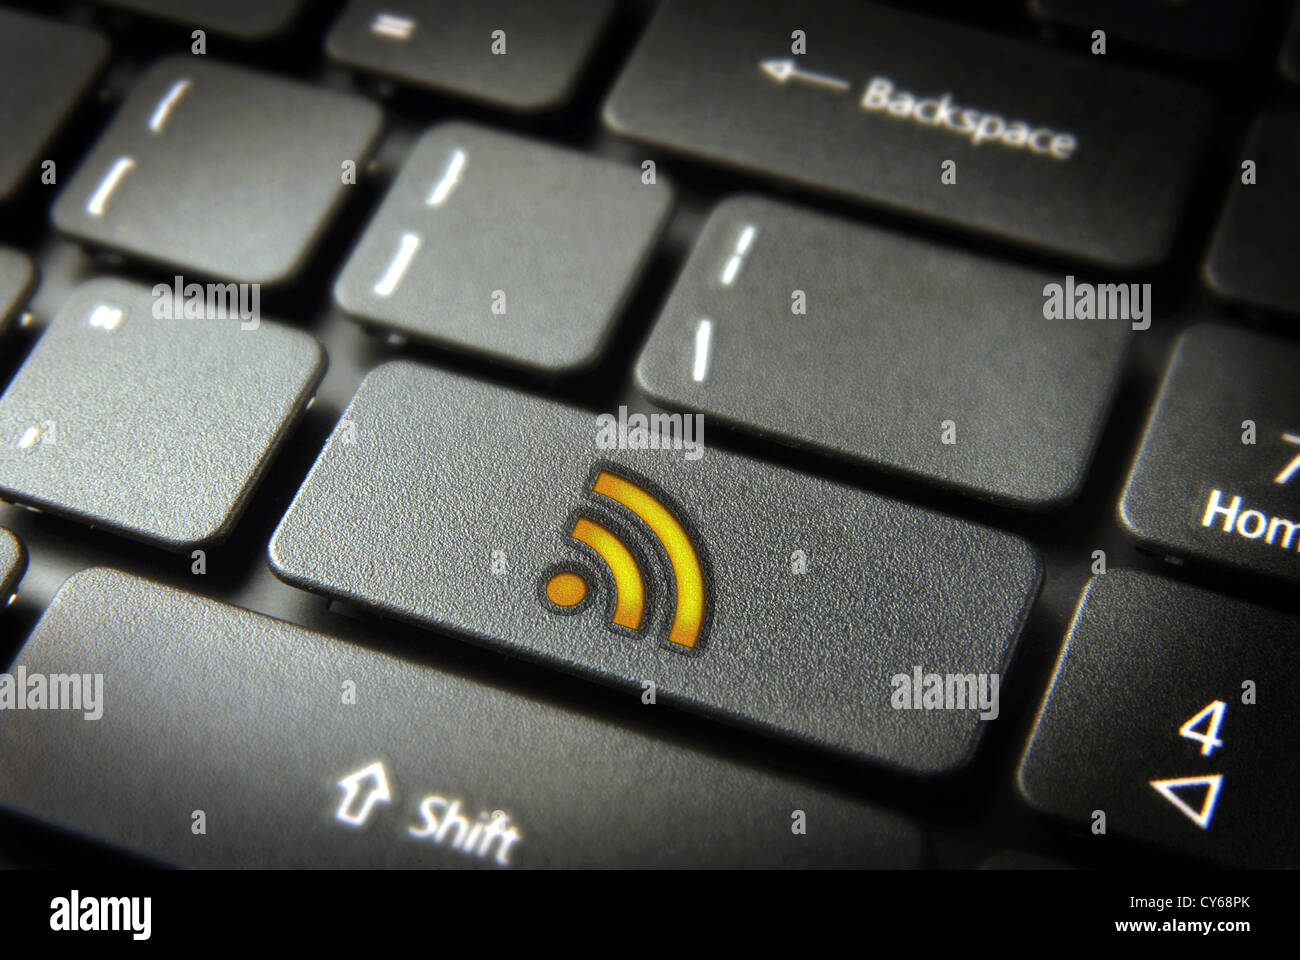 Golden technology RSS icon key on laptop keyboard. Included clipping path, so you can easily edit it. Stock Photo